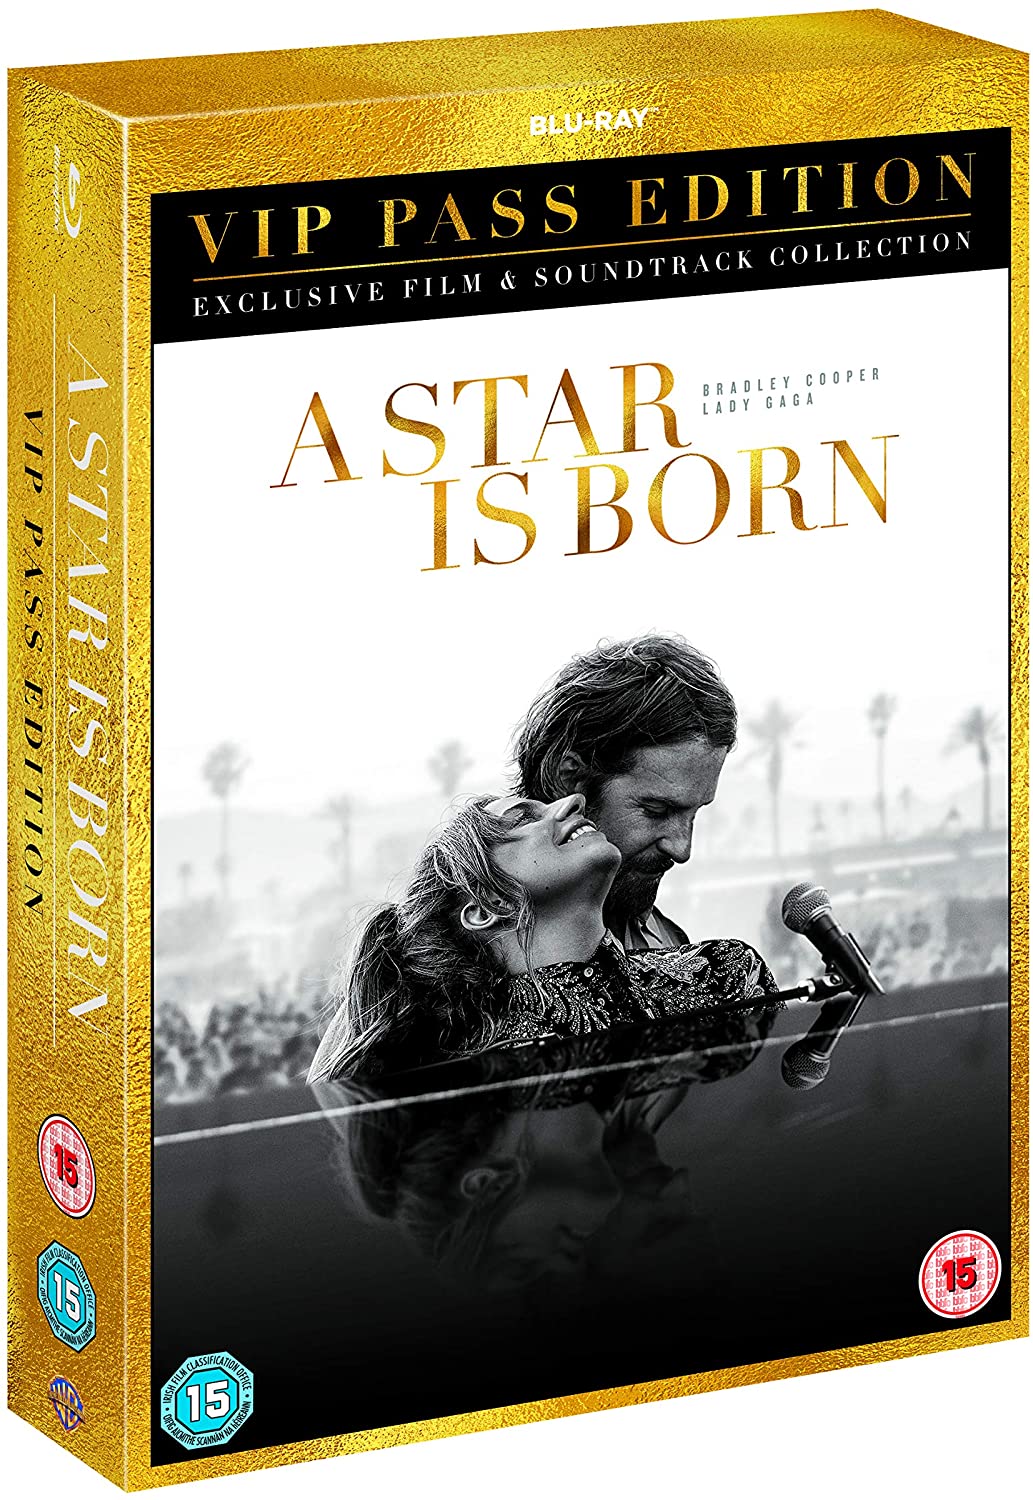 A Star is Born (2018) – VIP Pass Edition